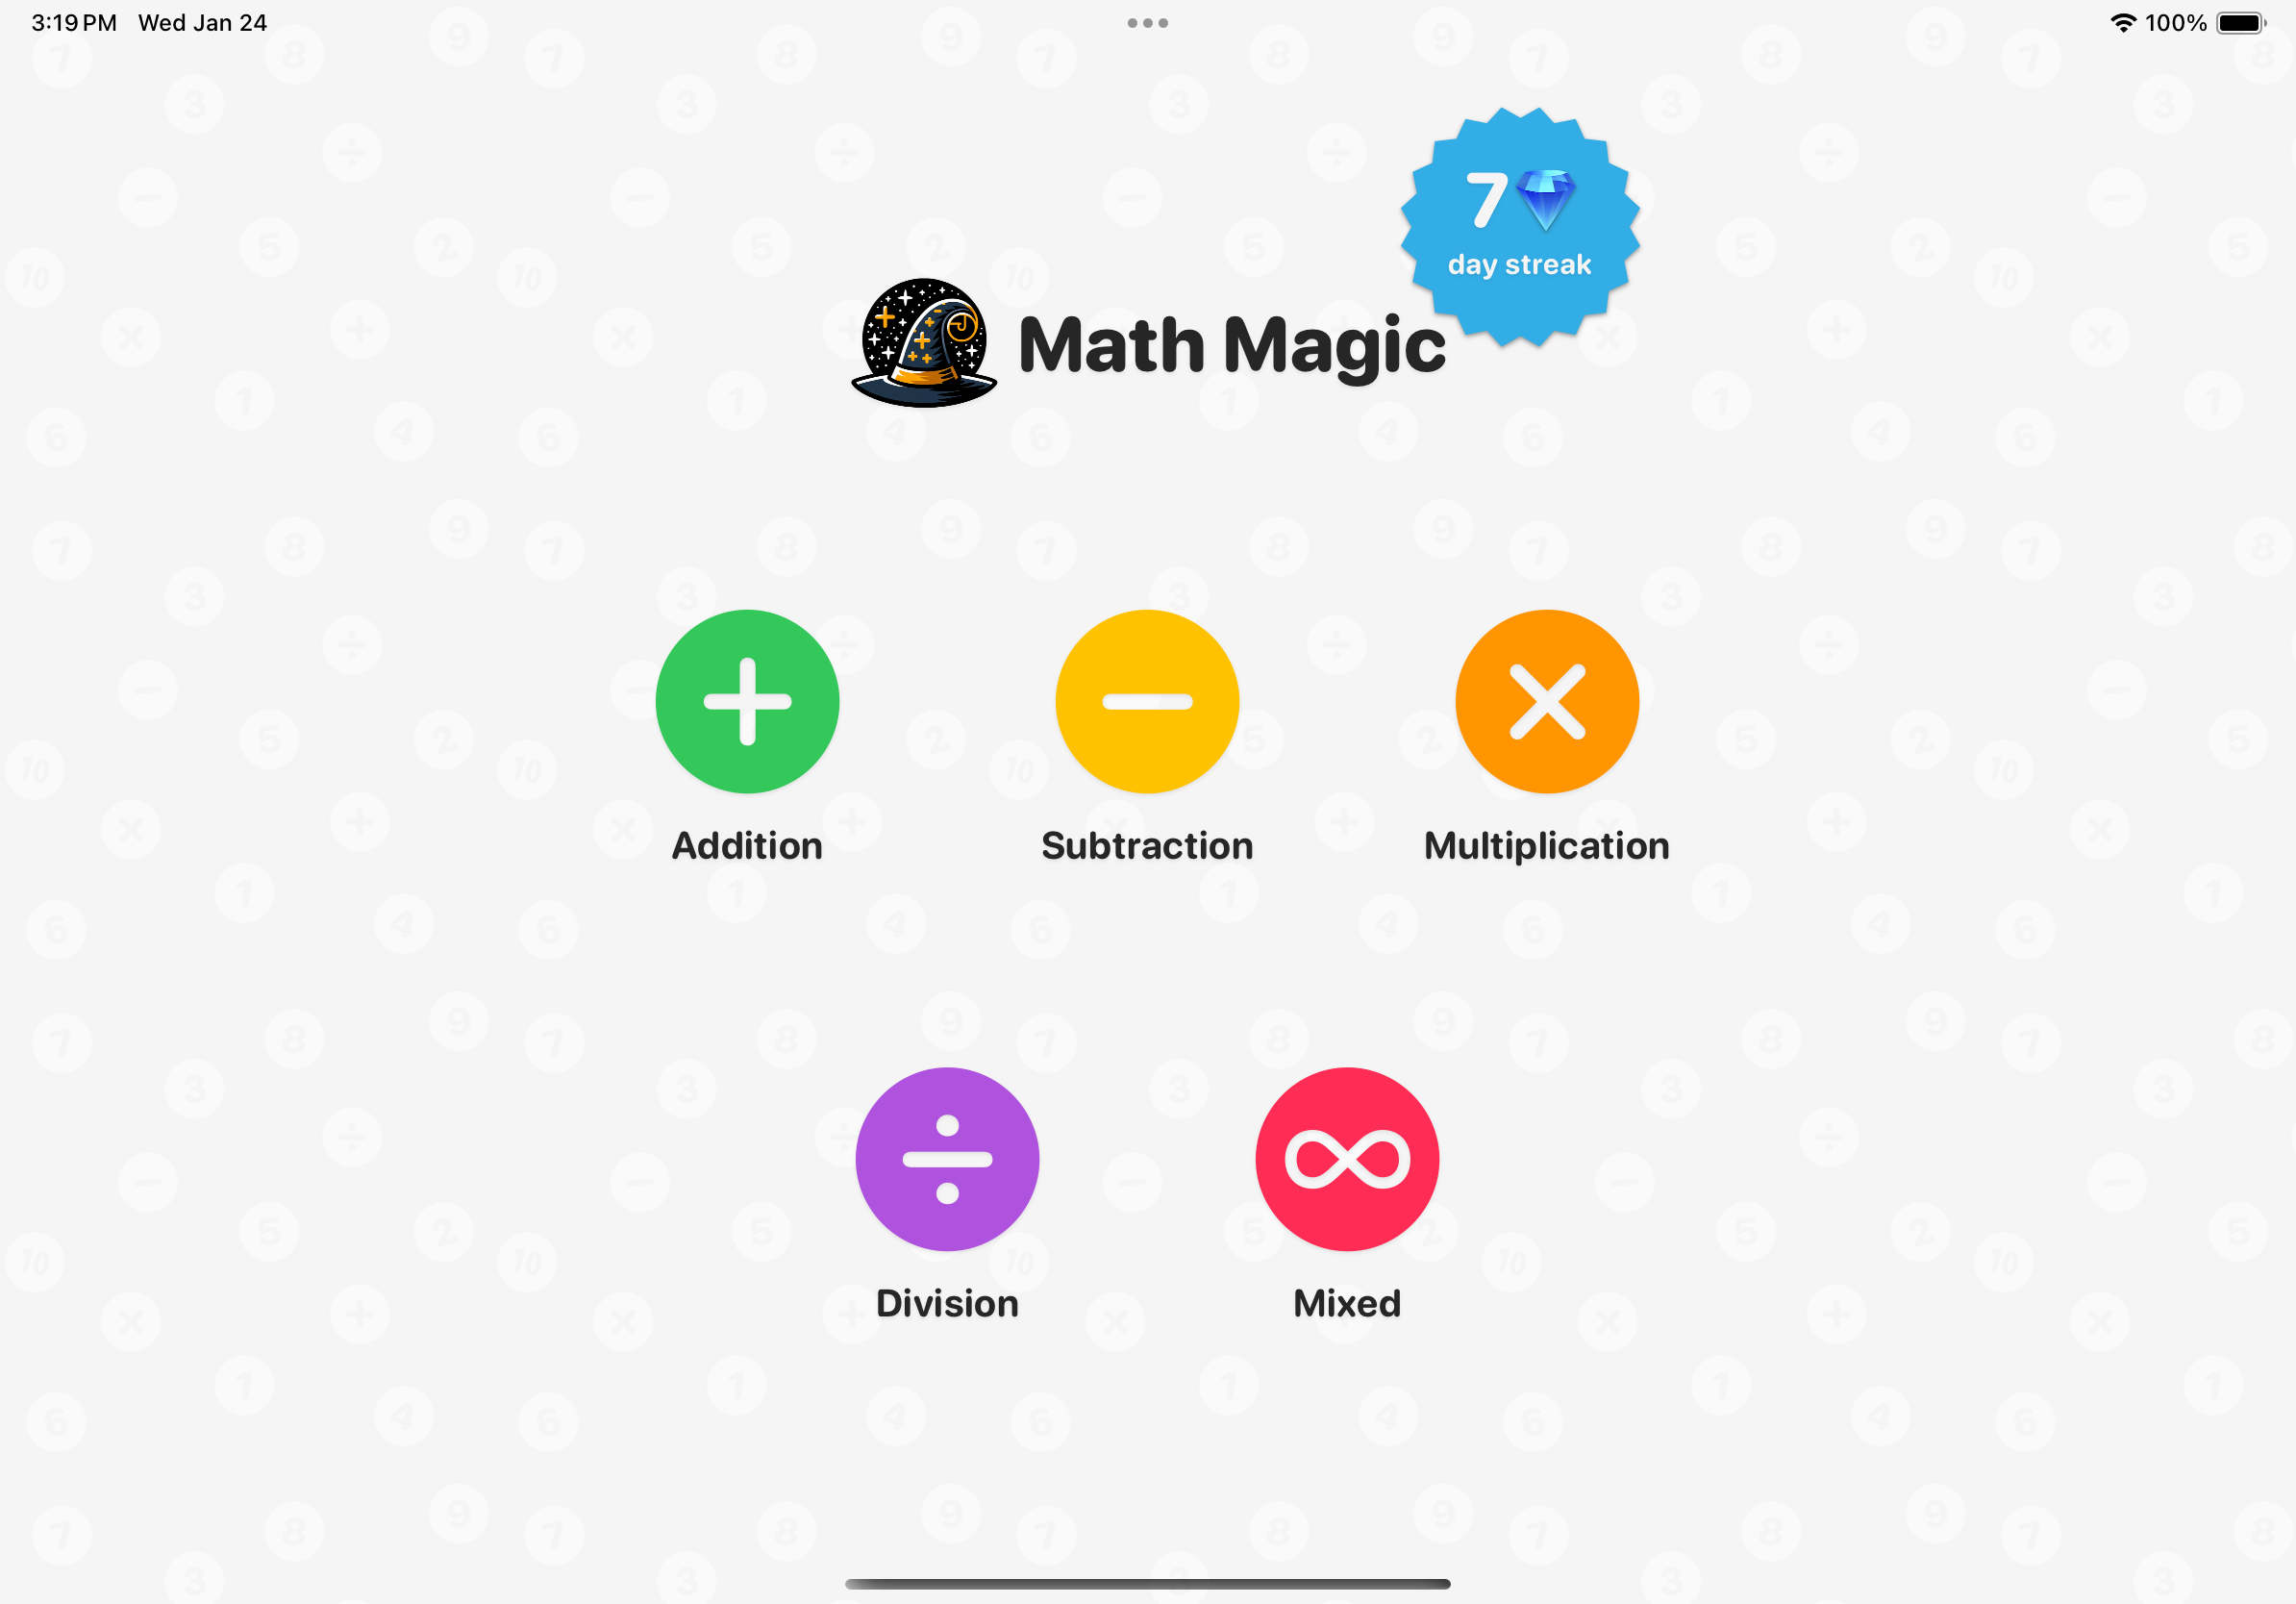 Launch screen of app showing options for Addition, Subtraction, Multiplication and Division practice